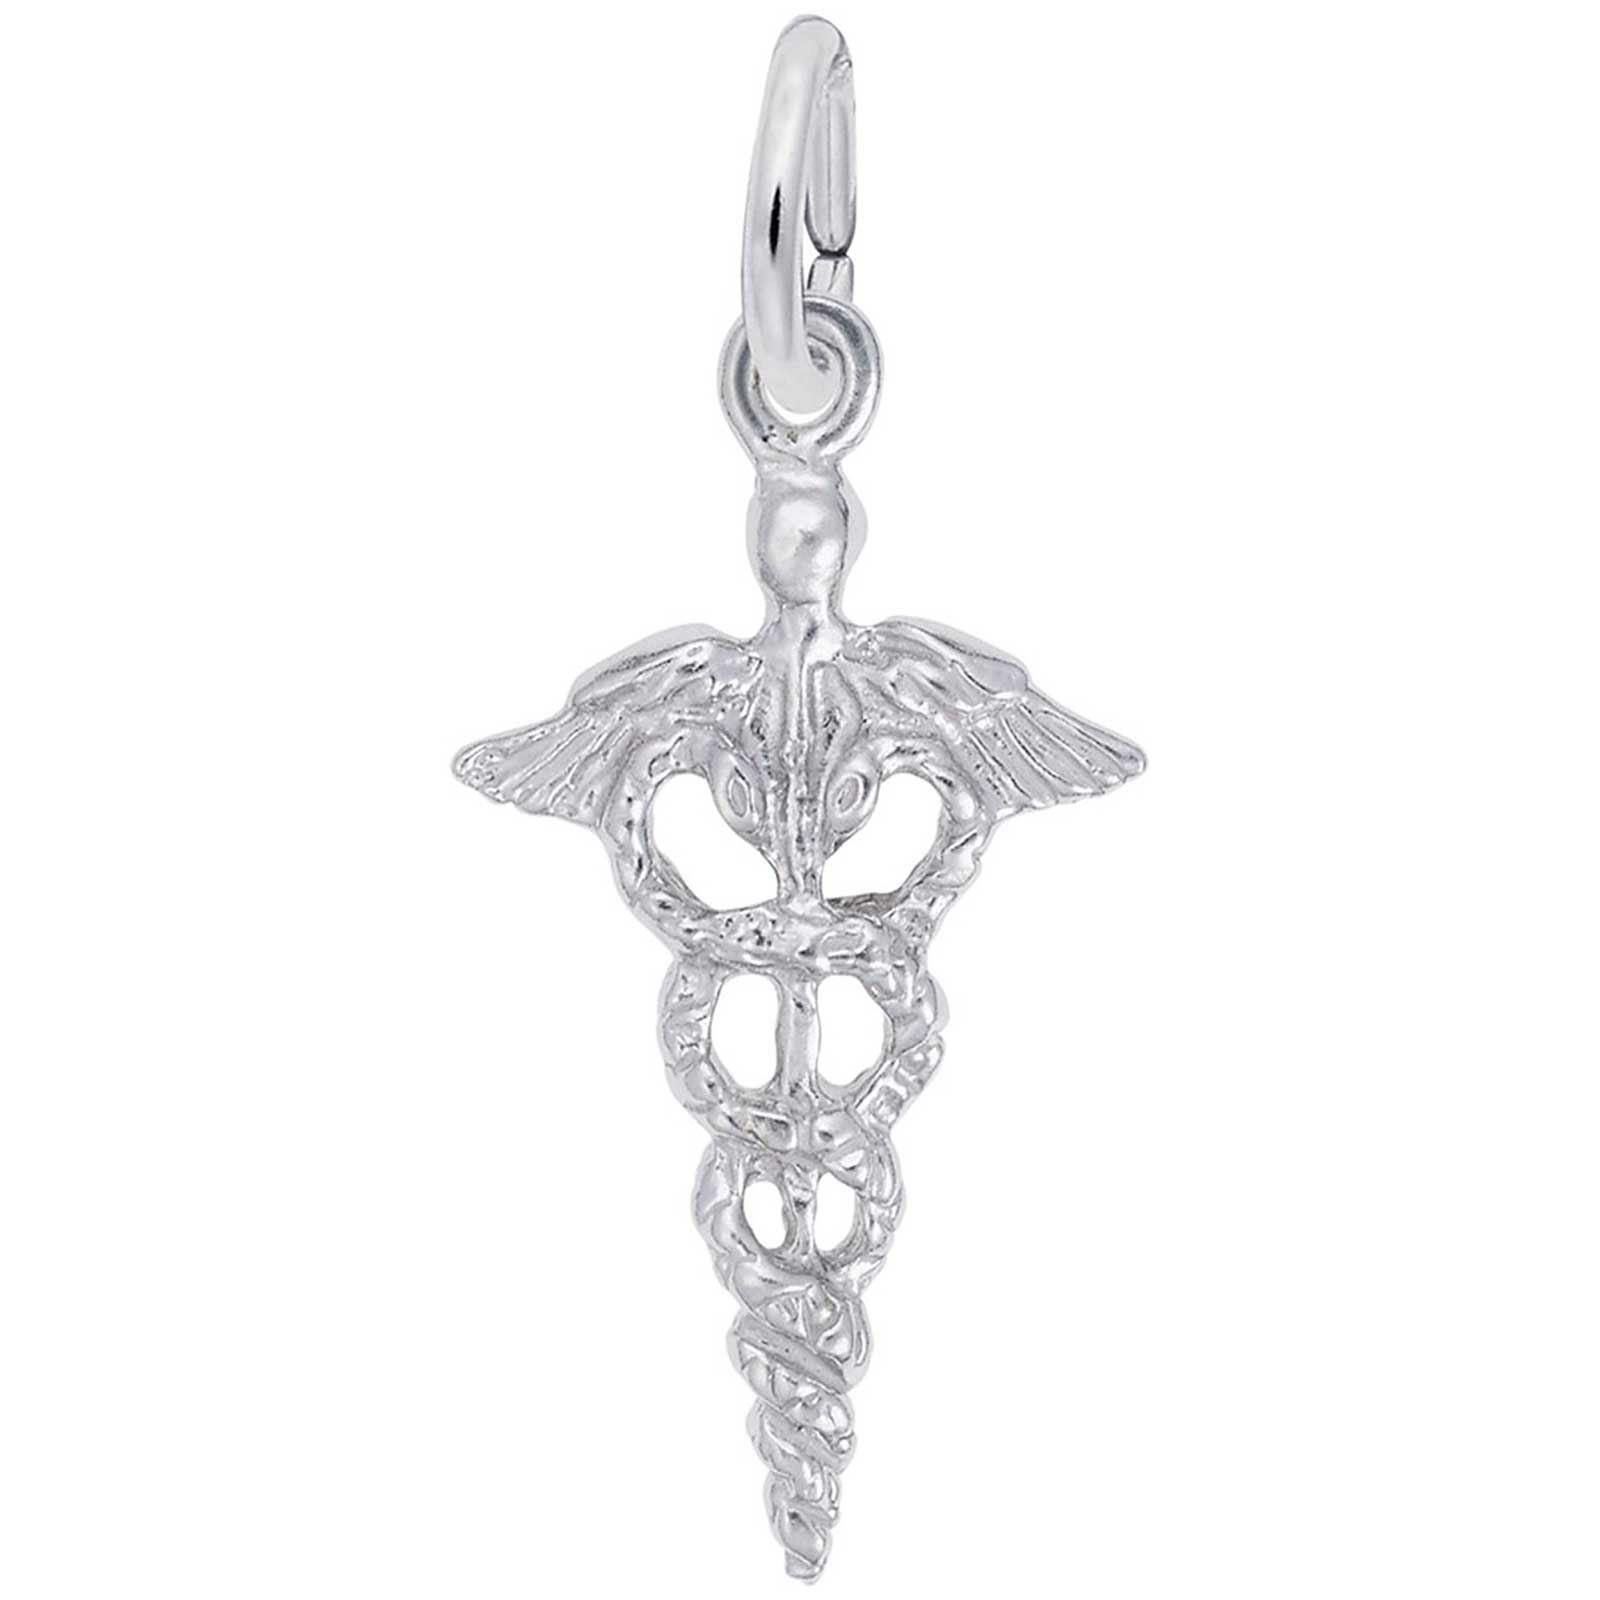 Rembrandt Charms Caduceus Charm with Lobster Clasp